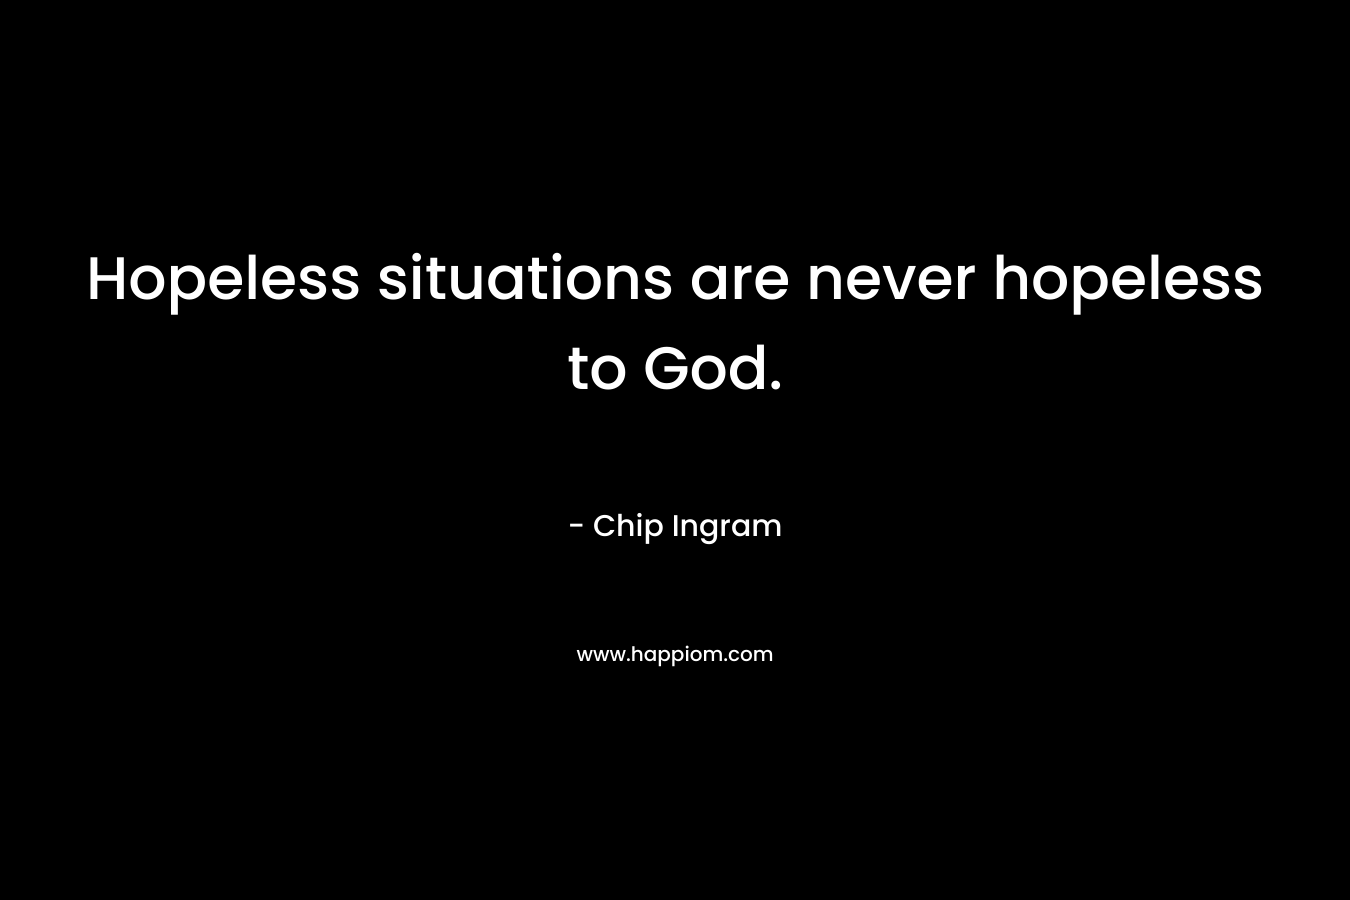 Hopeless situations are never hopeless to God.